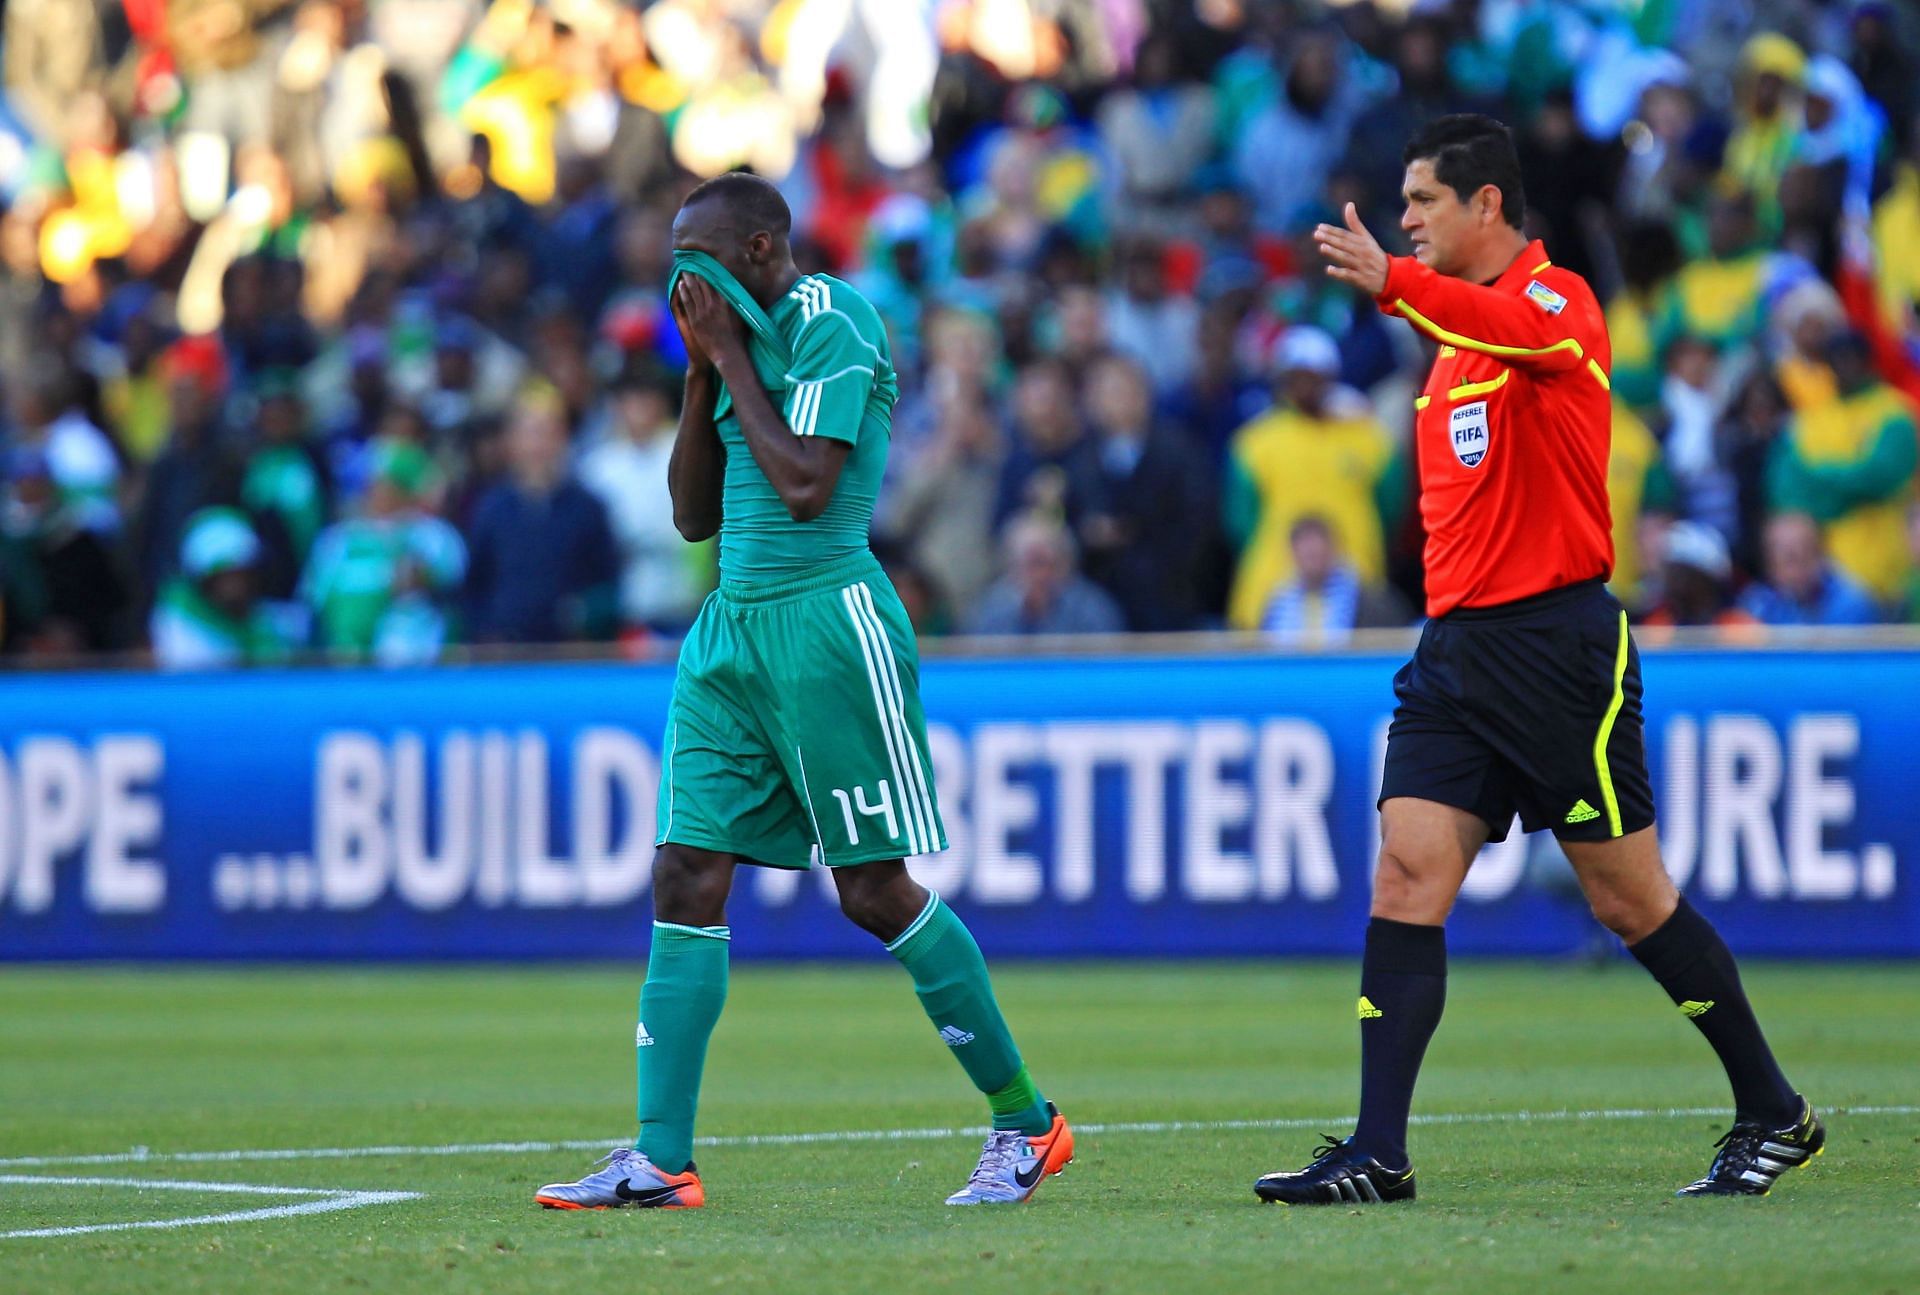 Sani Kaita of Nigeria is sent off by referee Oscar Ruiz during the 2010 FIFA World Cup South Africa Group B match between Greece and Nigeria.